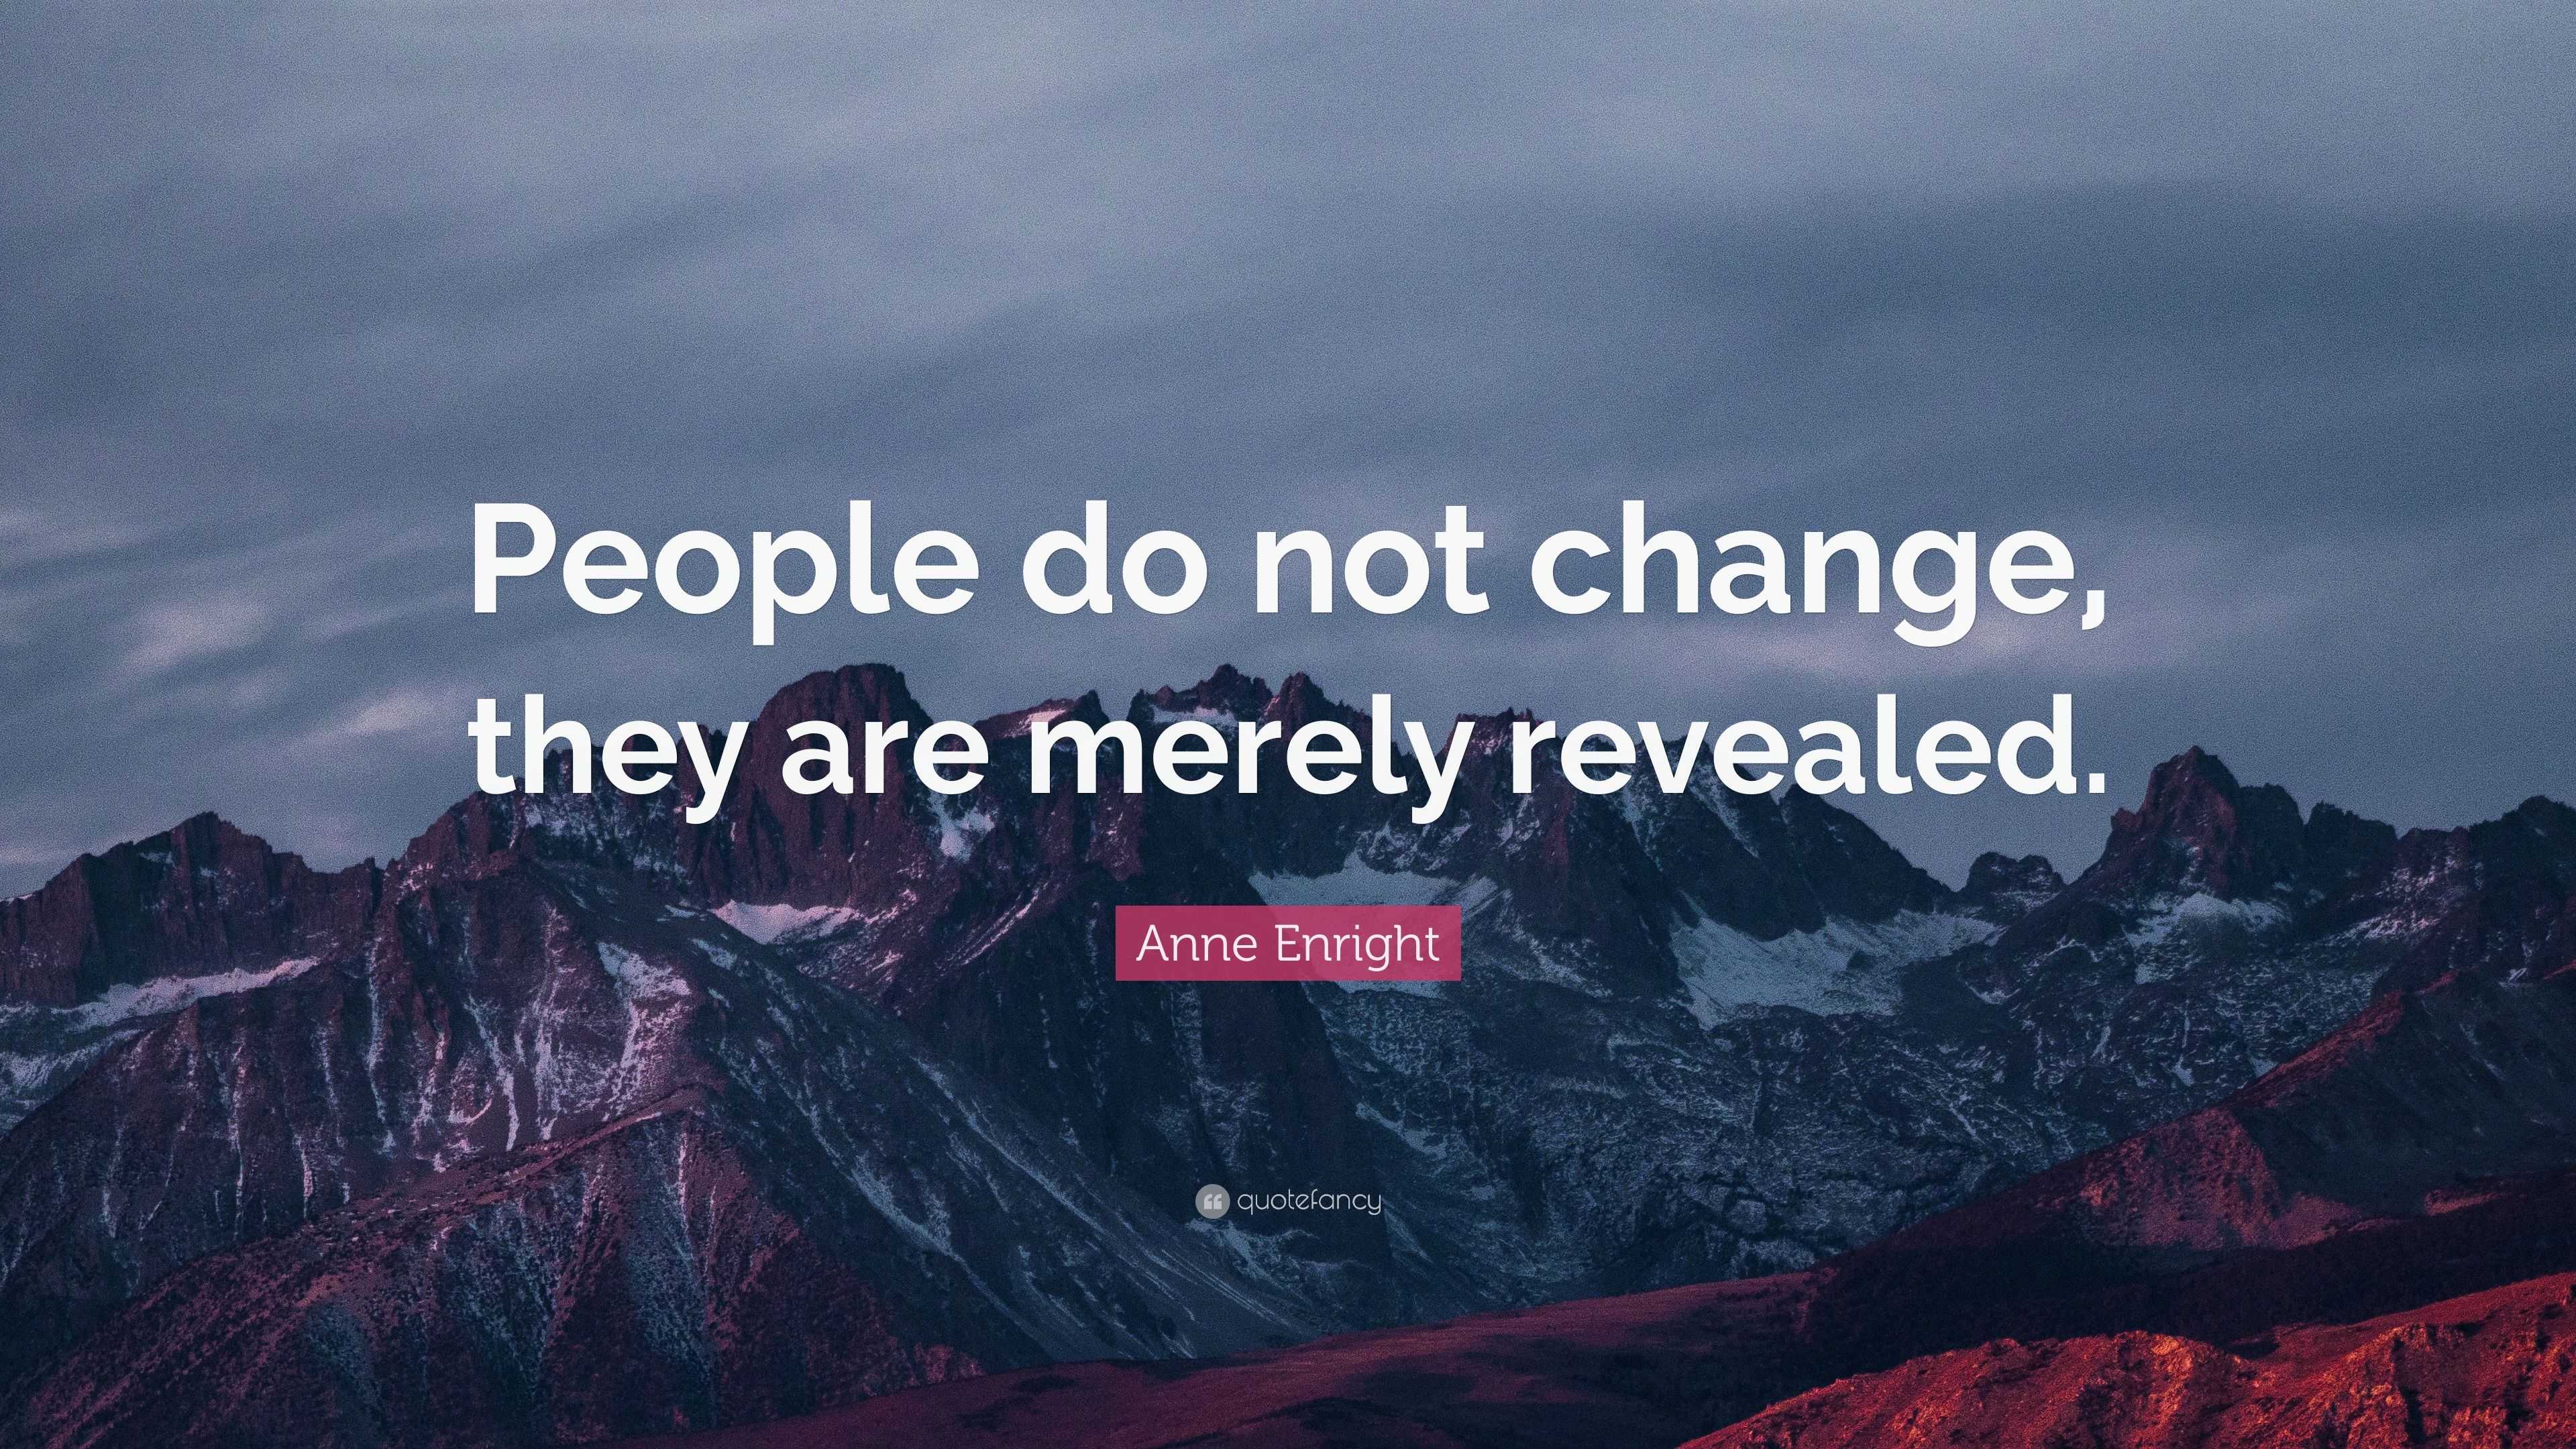 Anne Enright Quote: “People do not change, they are merely revealed.”